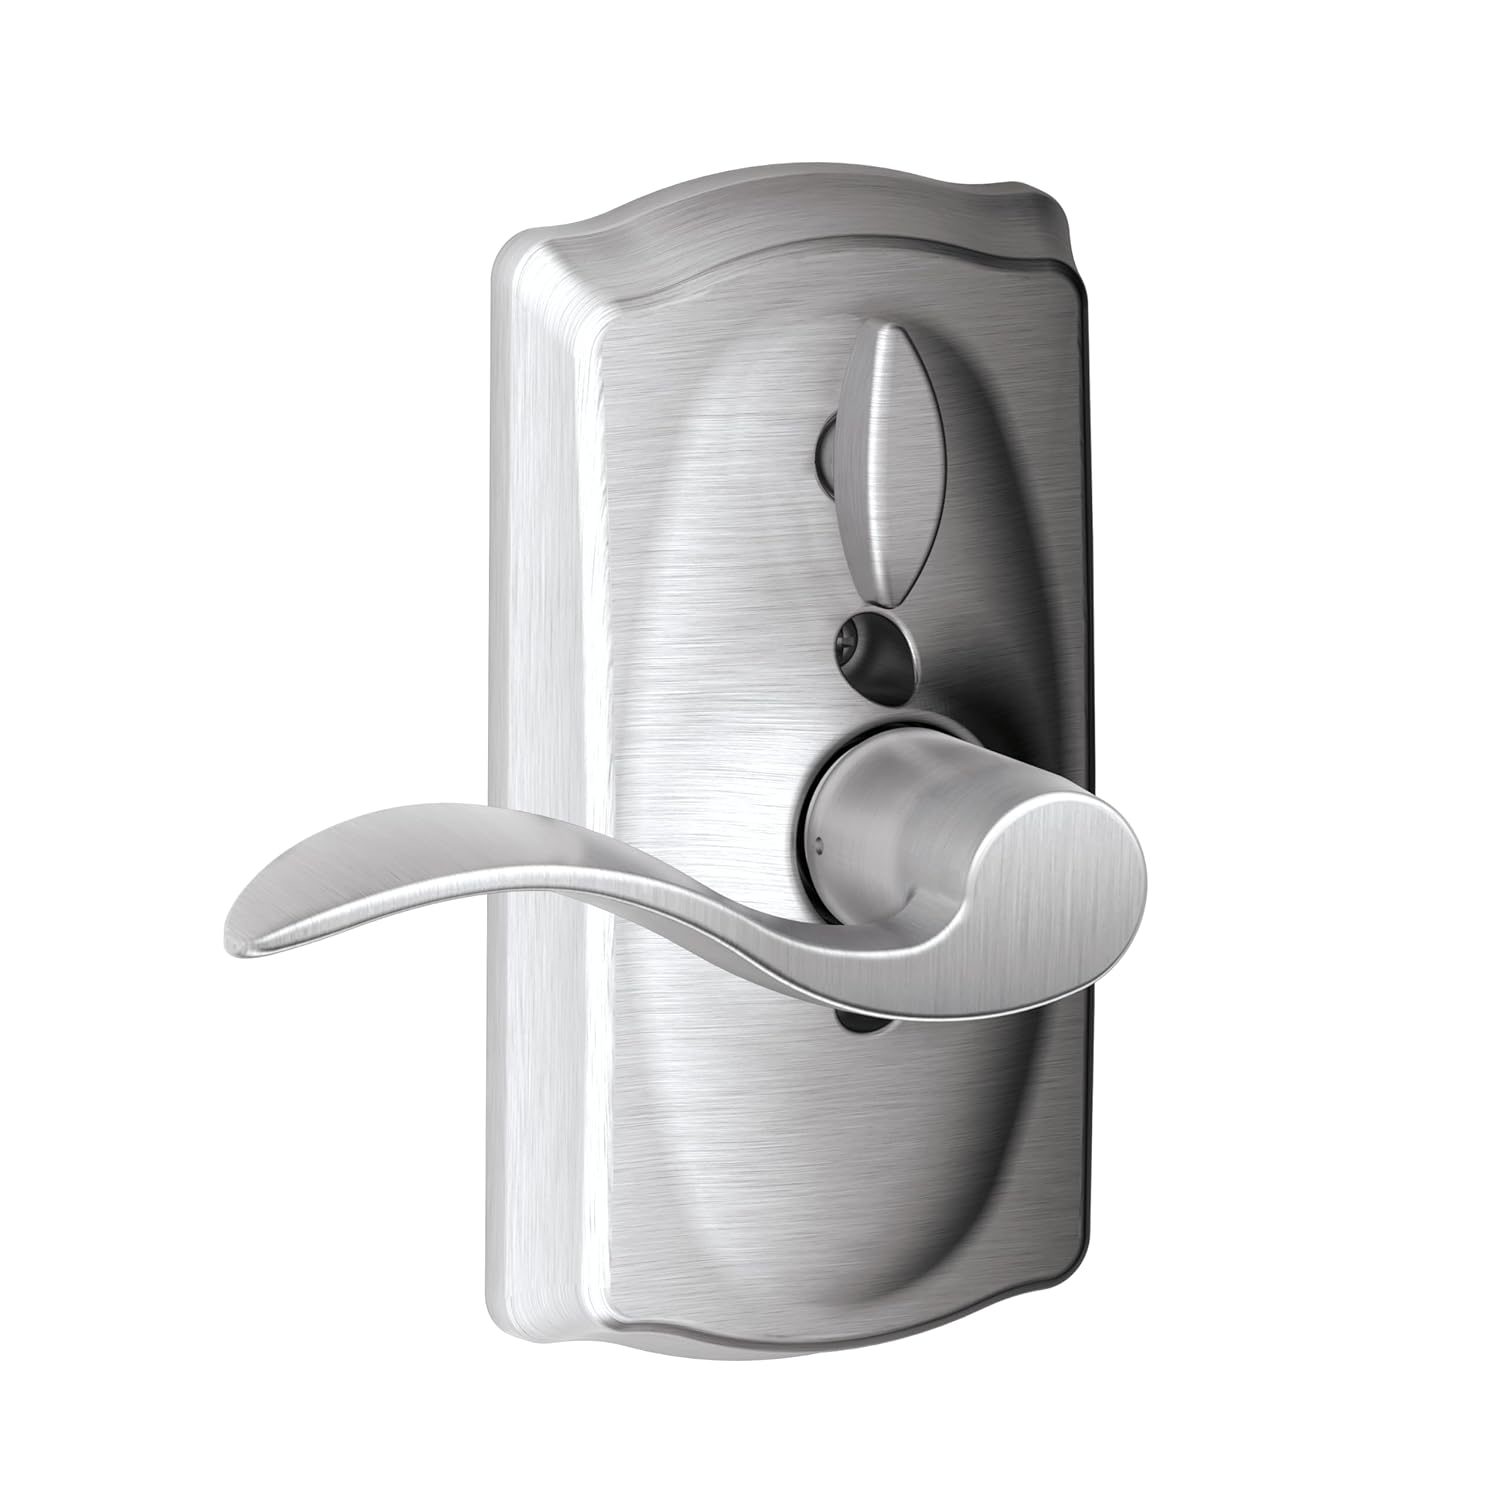 Schlage FE595 CAM 626 Acc Camelot Keypad Entry with Flex-Lock and Accent Levers, Brushed Chrome